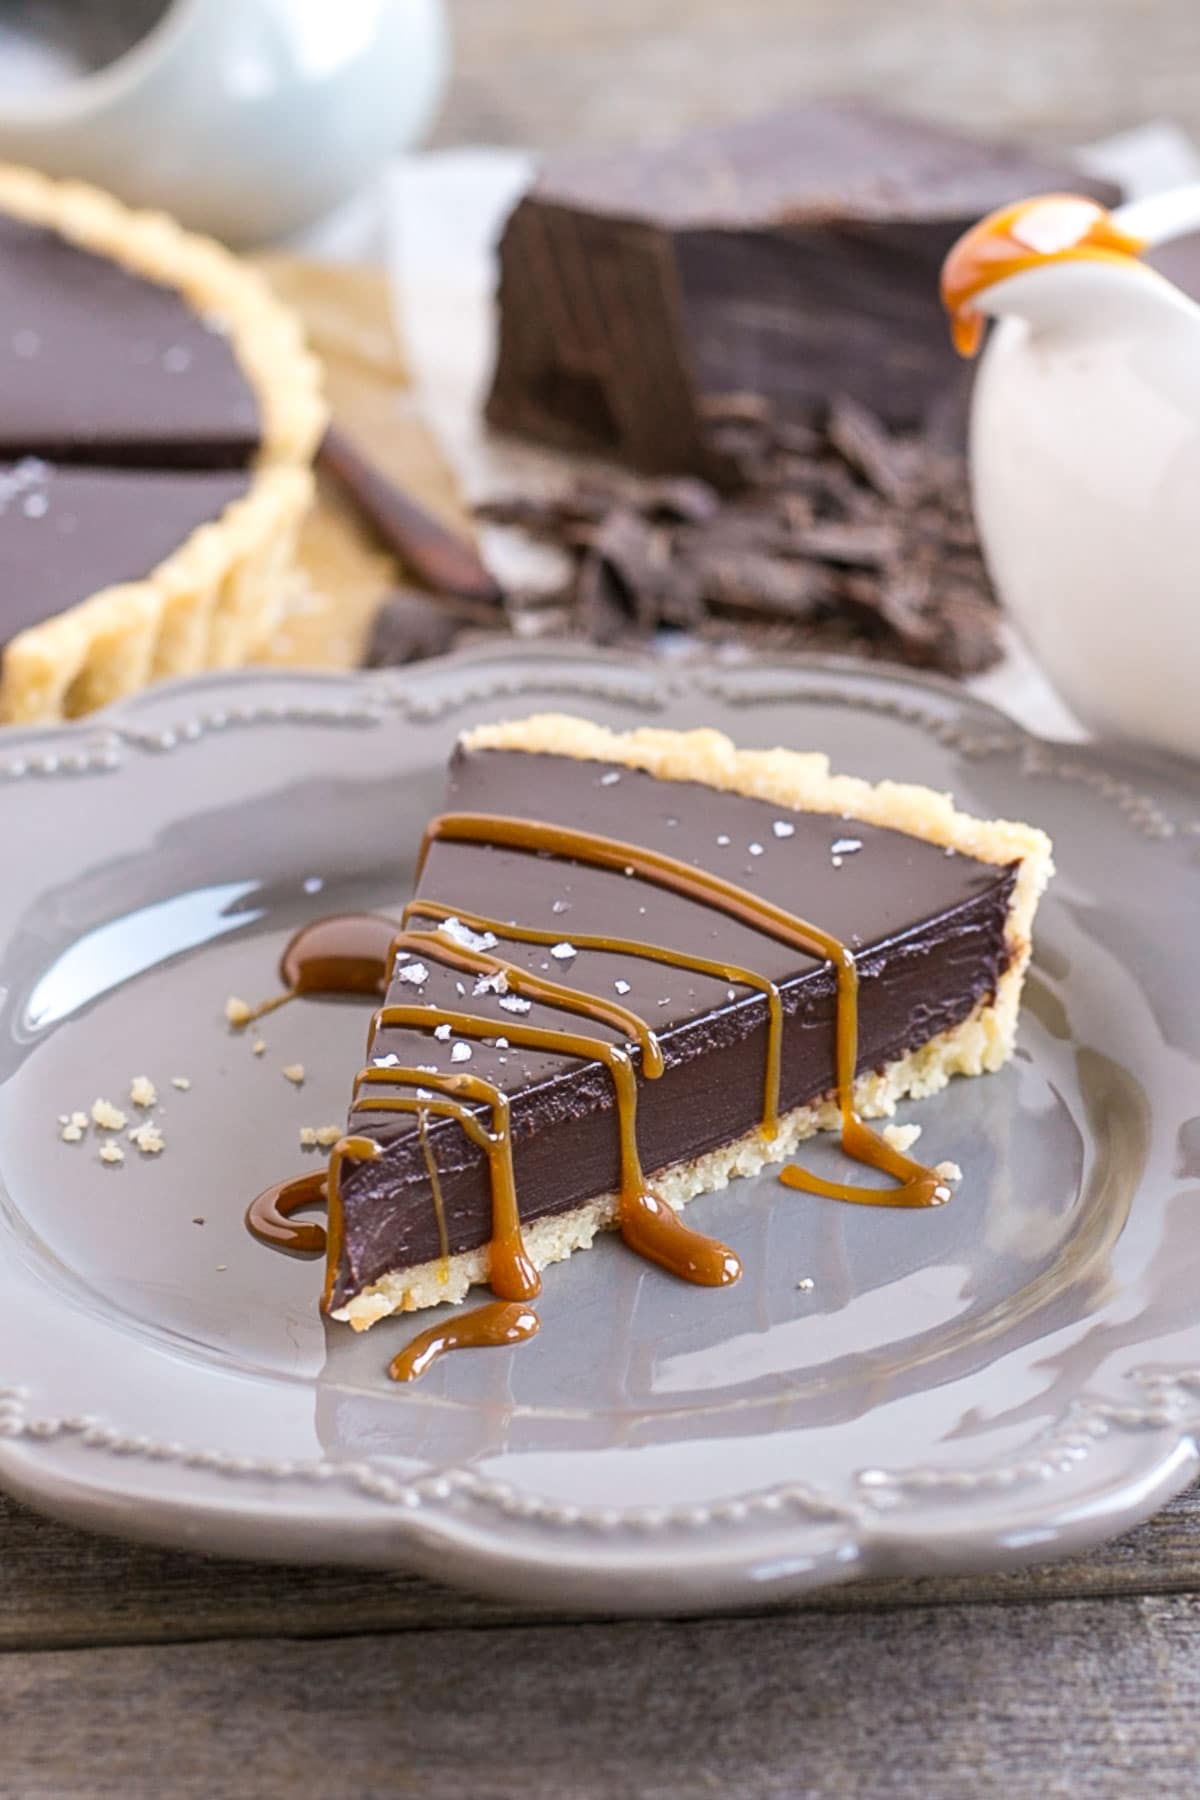 This simple and elegant Dark Chocolate Ganache Tart can be topped with anything you like, from a sprinkling of sea salt to dulce de leche or fresh berries. | livforcake.com